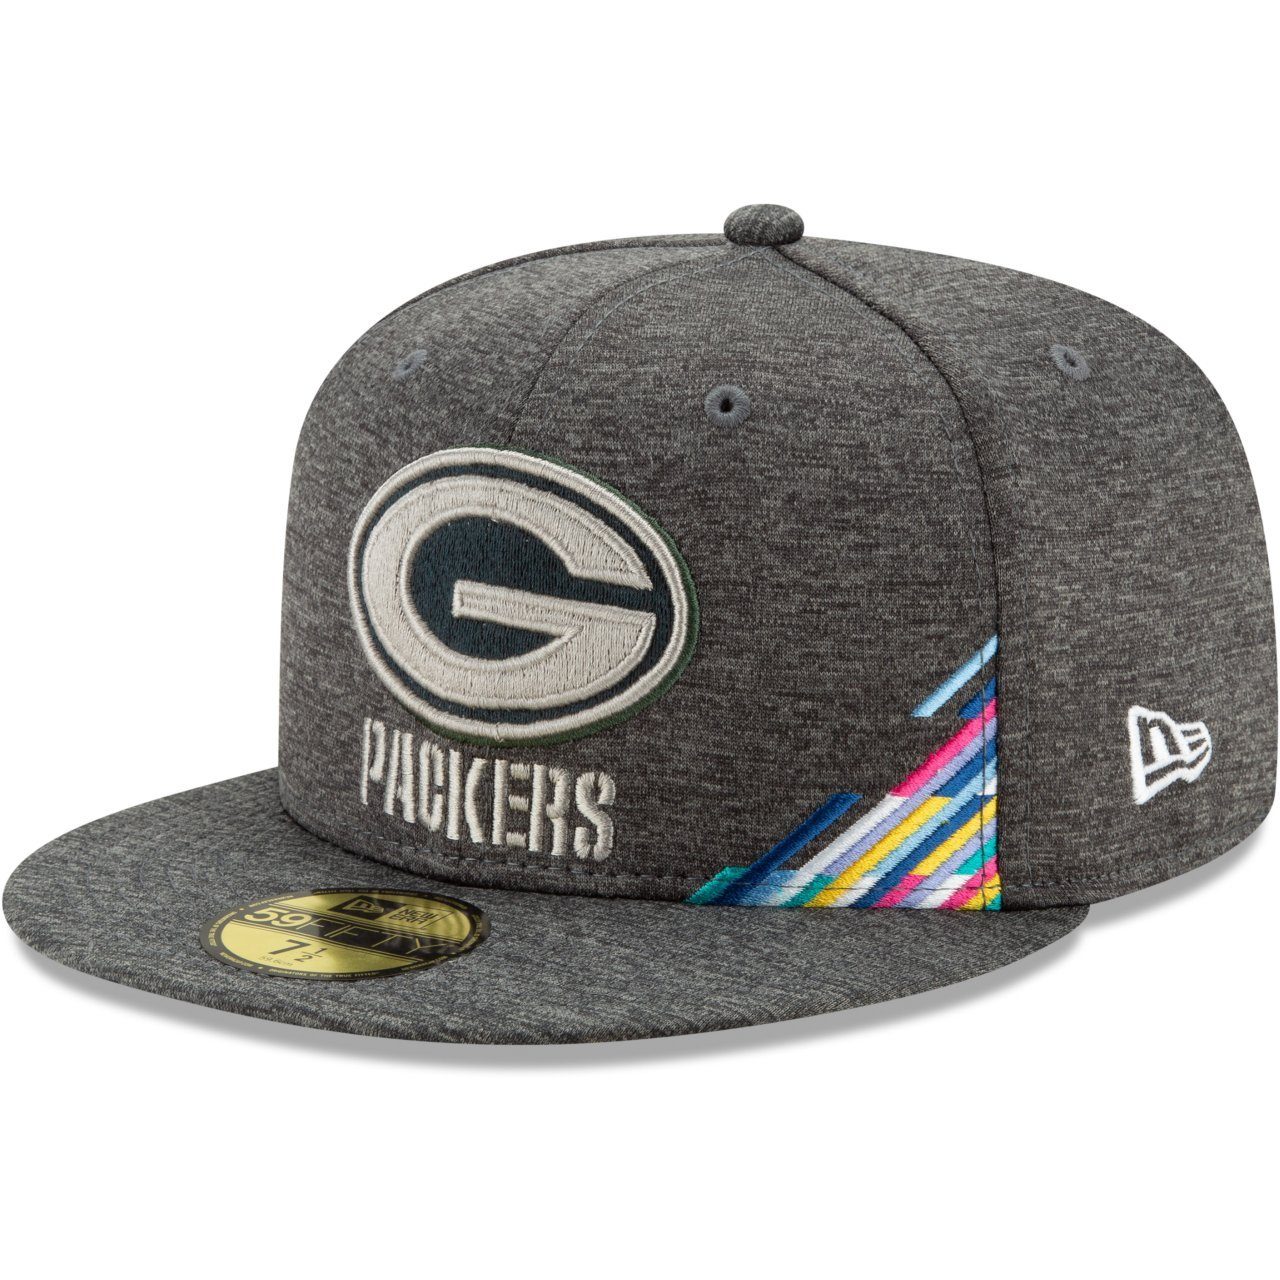 New Era Fitted Cap 59Fifty CRUCIAL CATCH NFL Teams Green Bay Packers